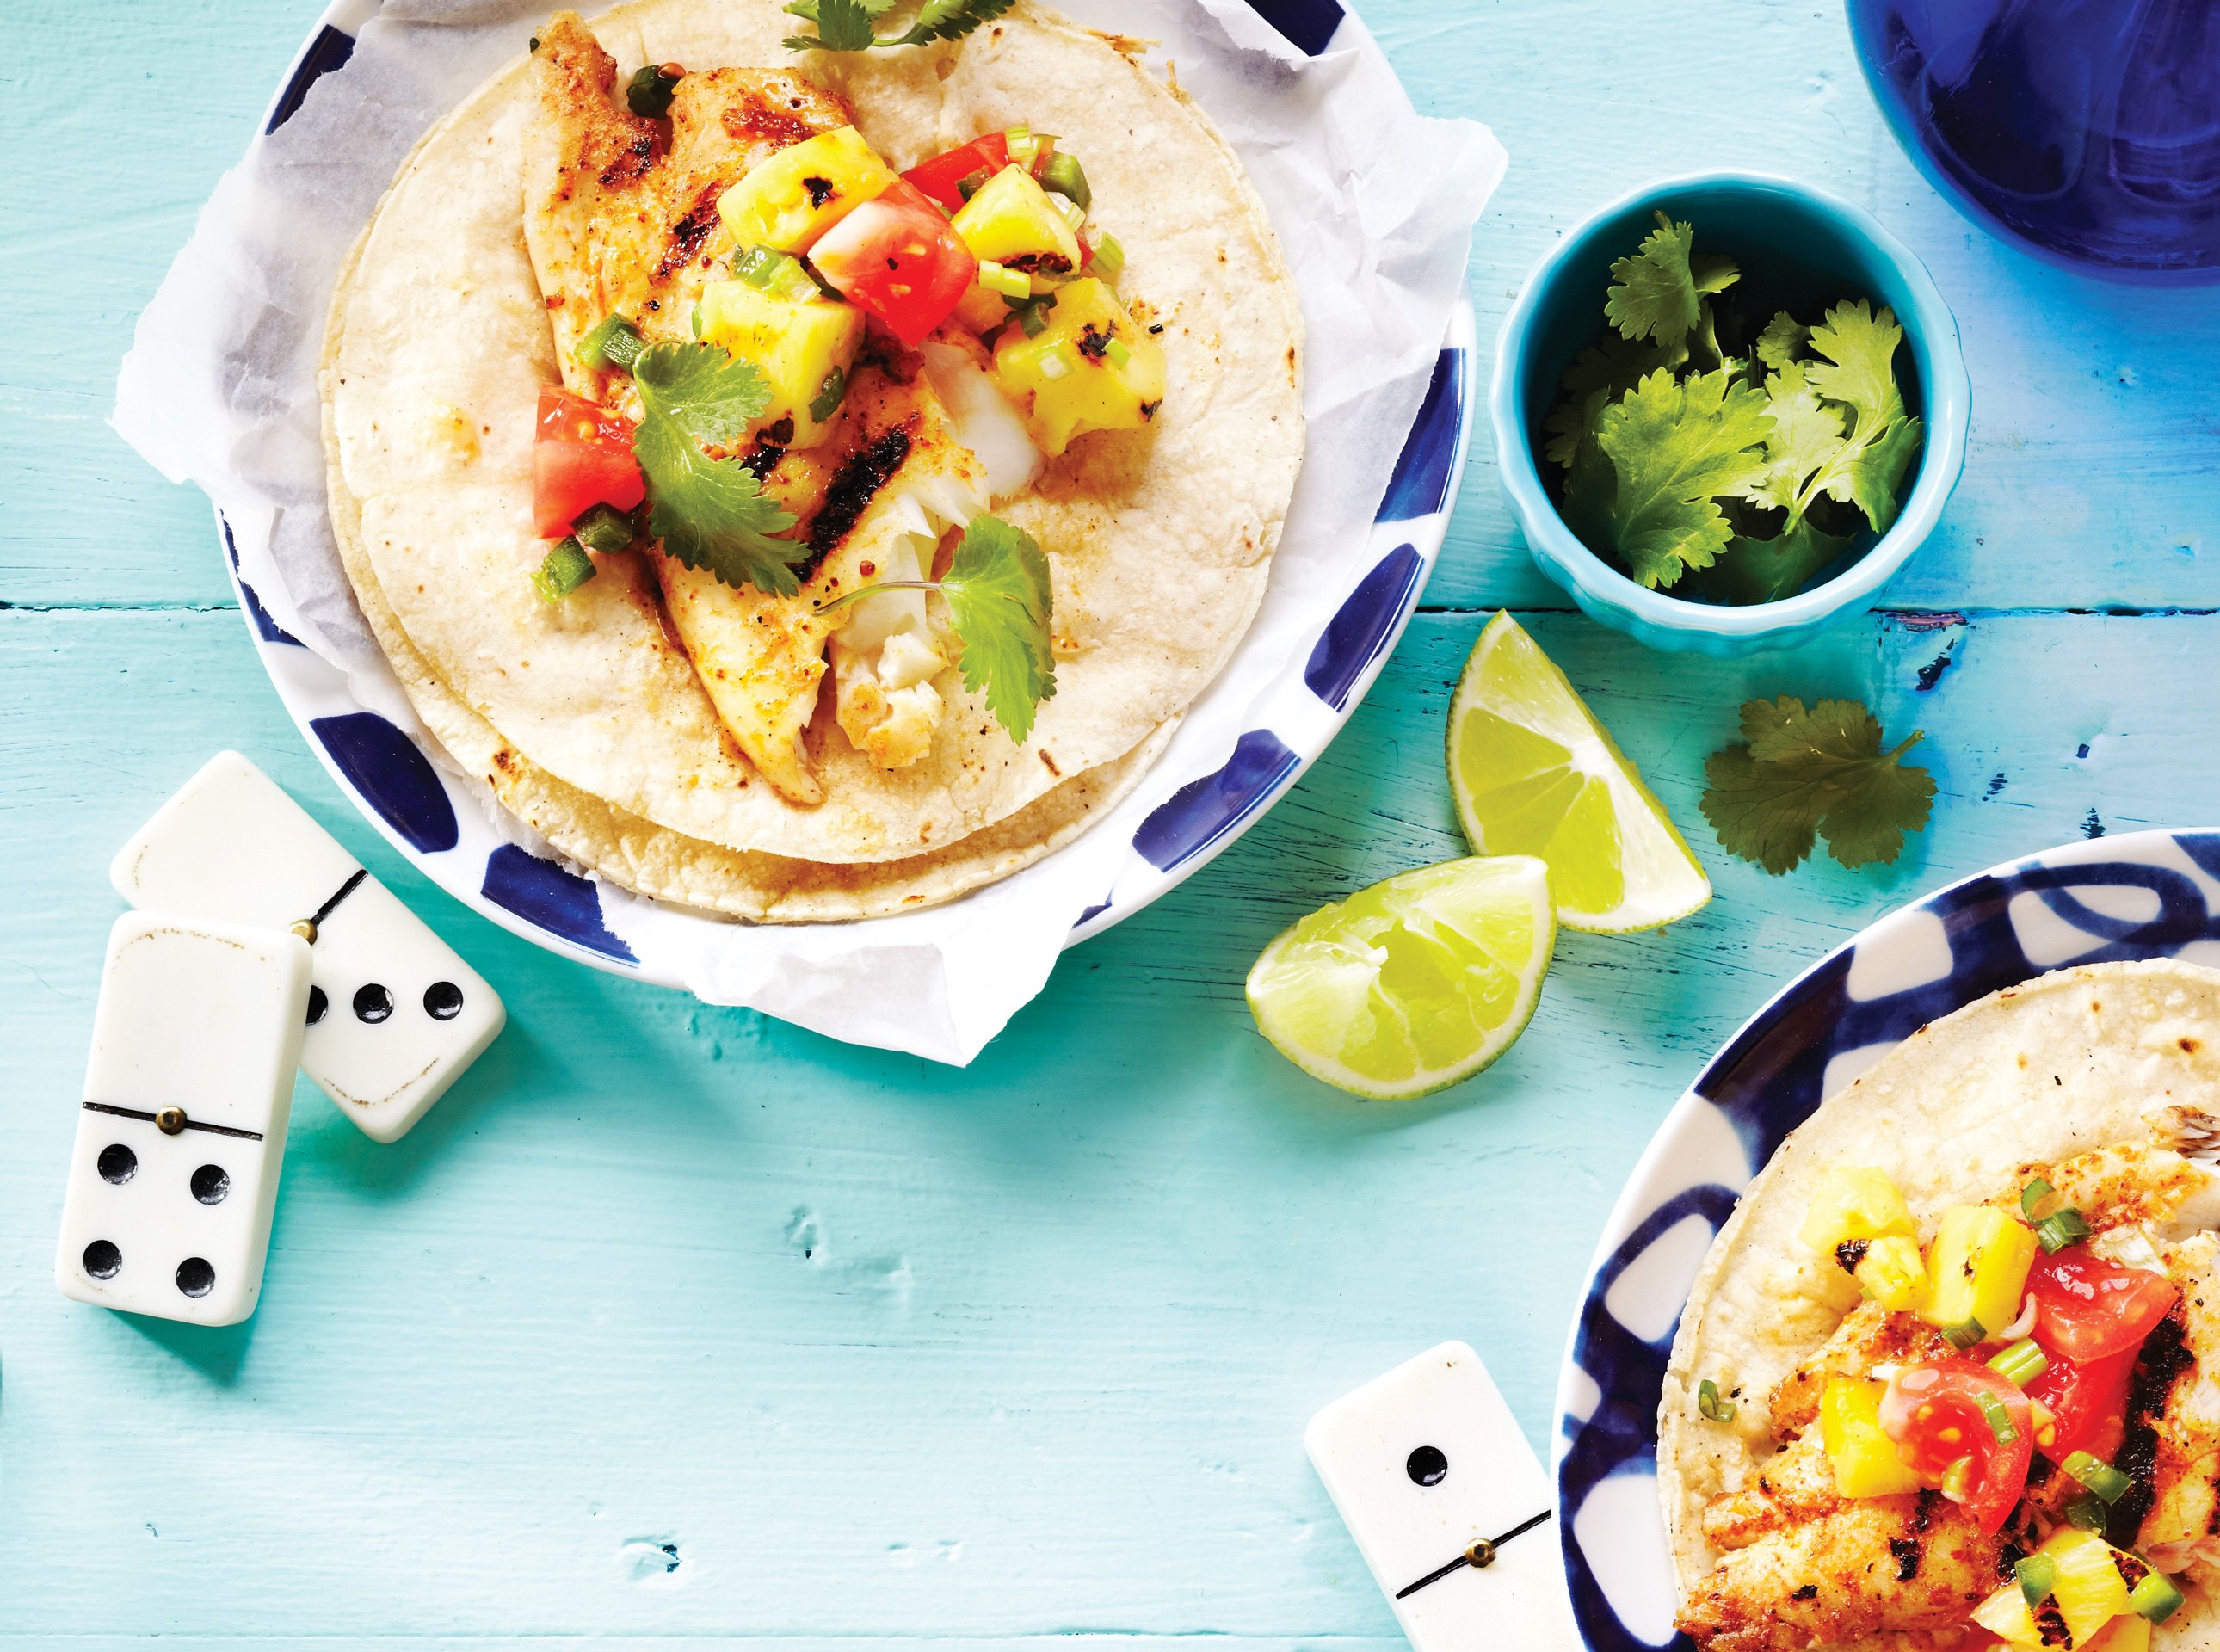 Grilled Fish Tacos with Pineapple Salsa